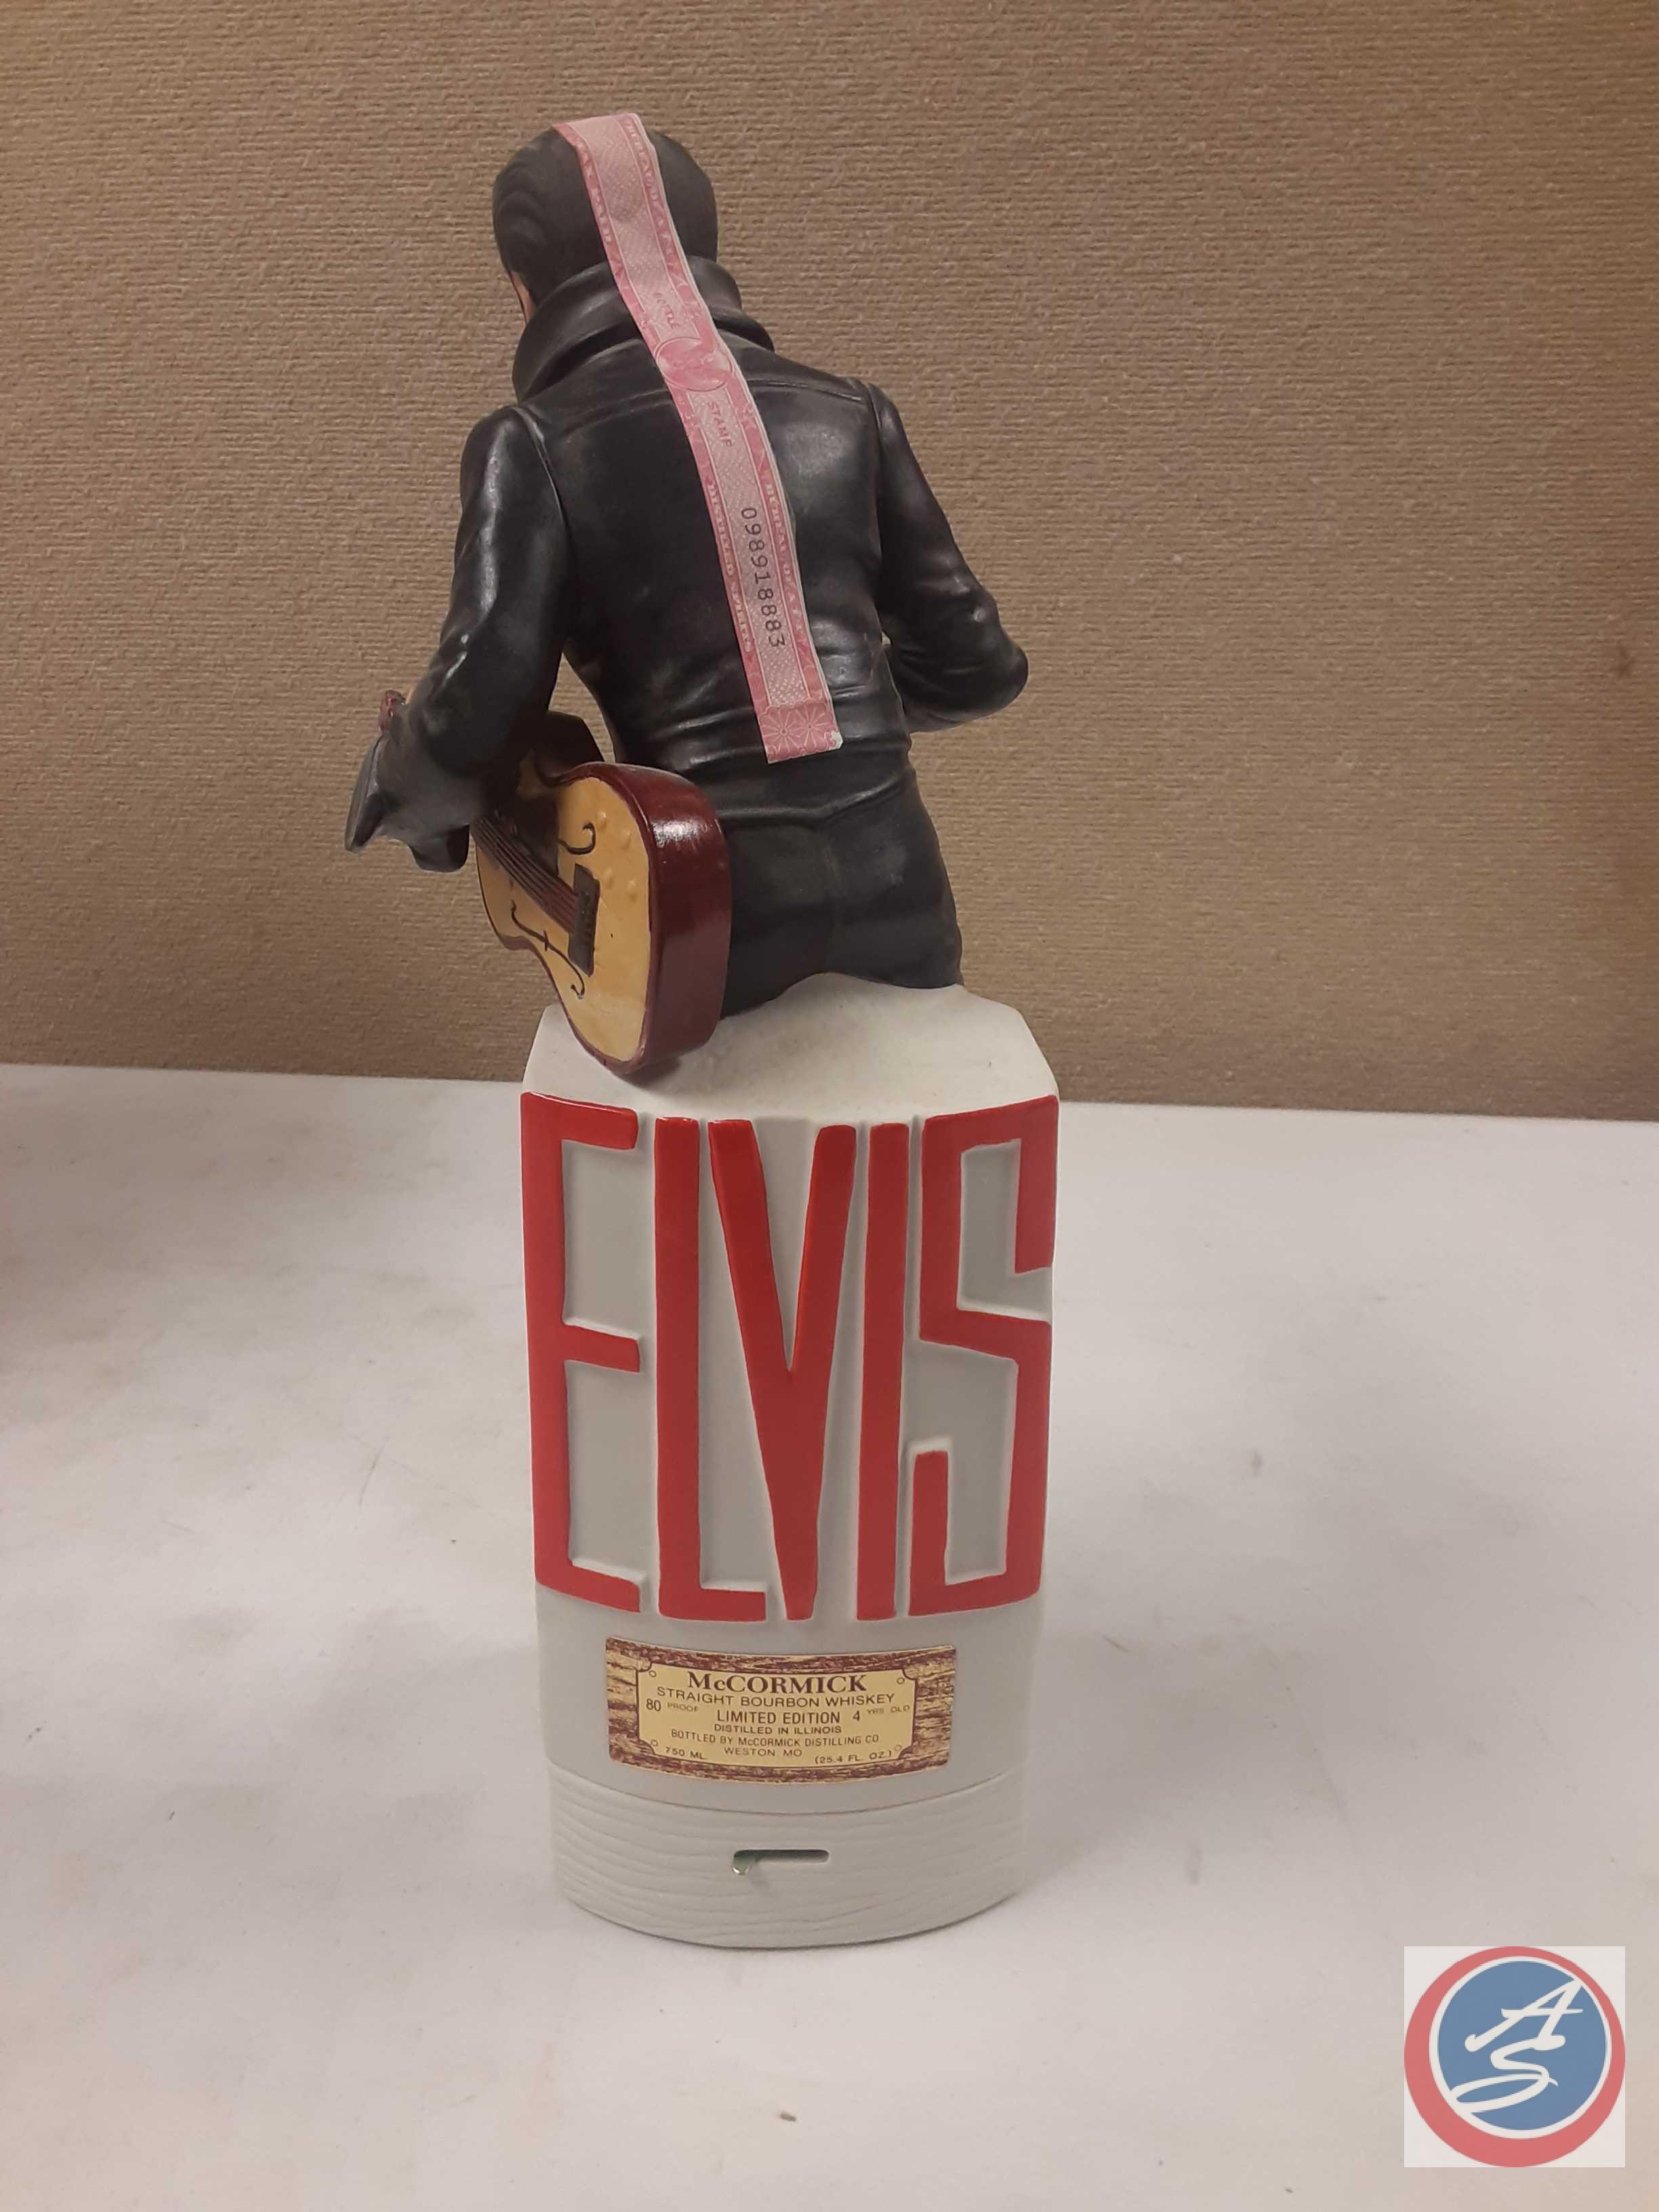 Forever Elvis 68 straight bourbon whiskey decanter with music box unopened (NO SHIPPING- MUST BE 21)